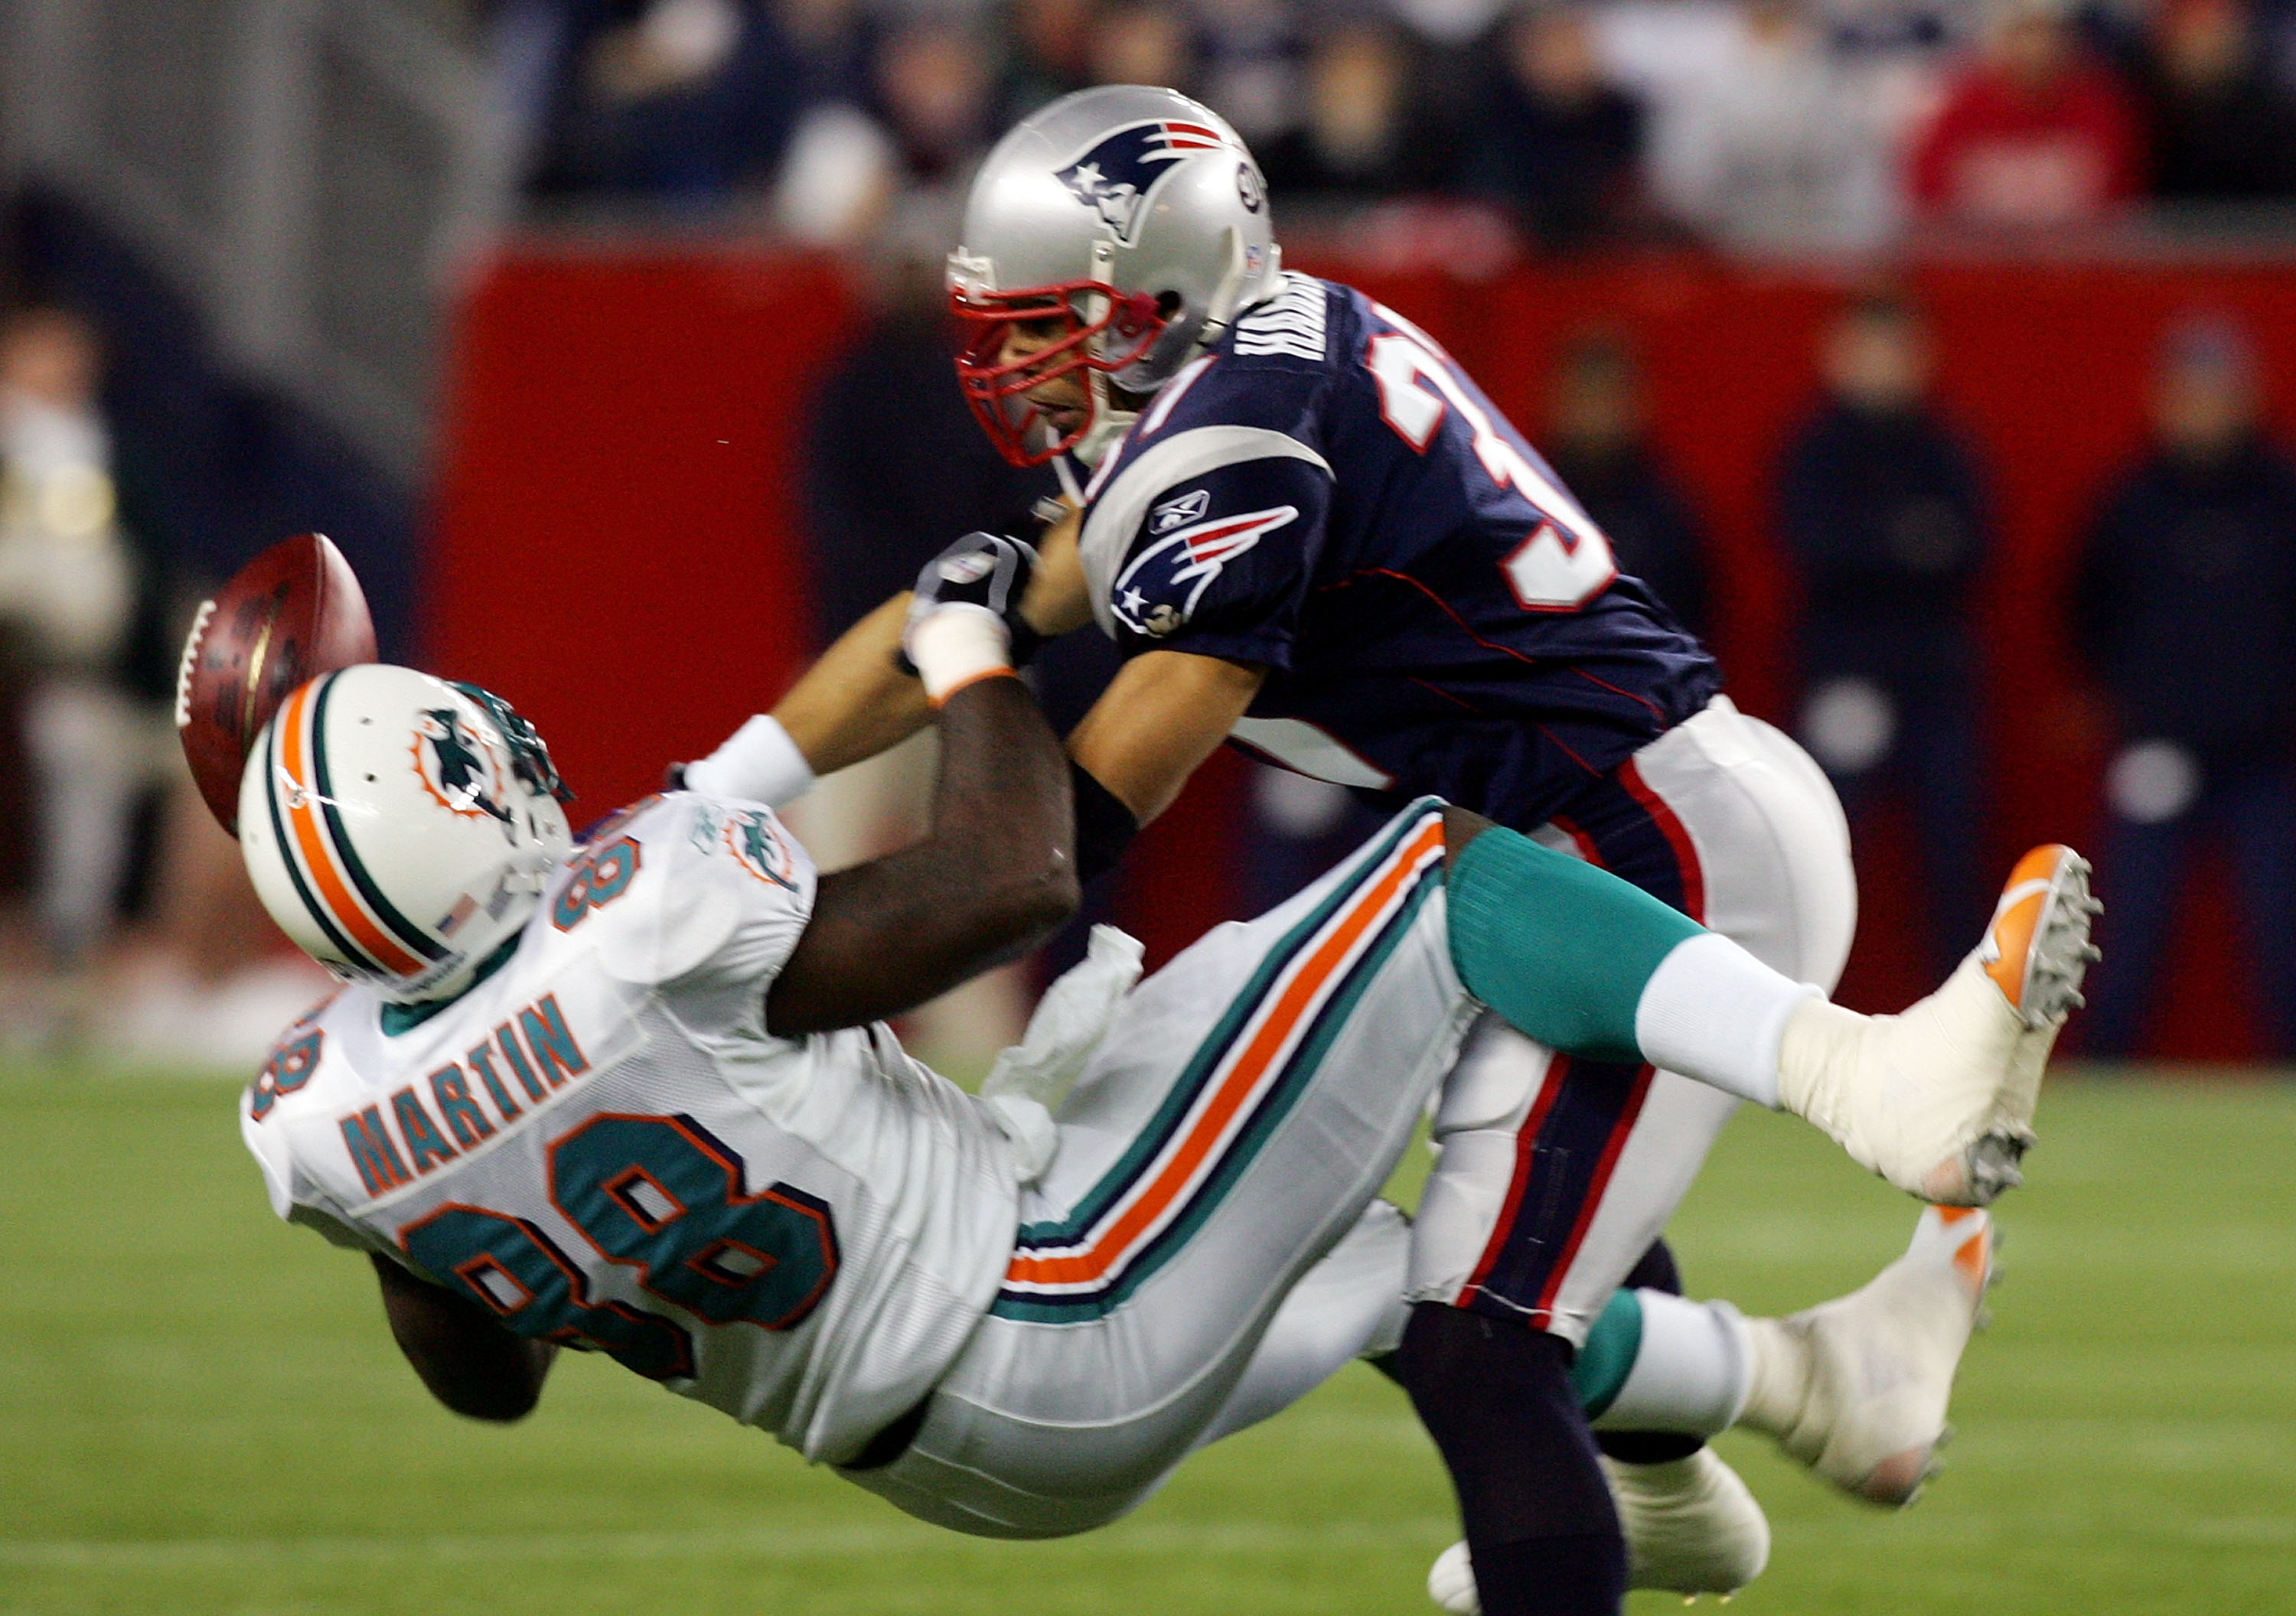 Rodney Harrison of the New England Patriots breaks up a pass intended for David Martin of the Miami Dolphins at Gillette Stadium on December 23, 2007. (Photo by Jim McIsaac/Getty Images)